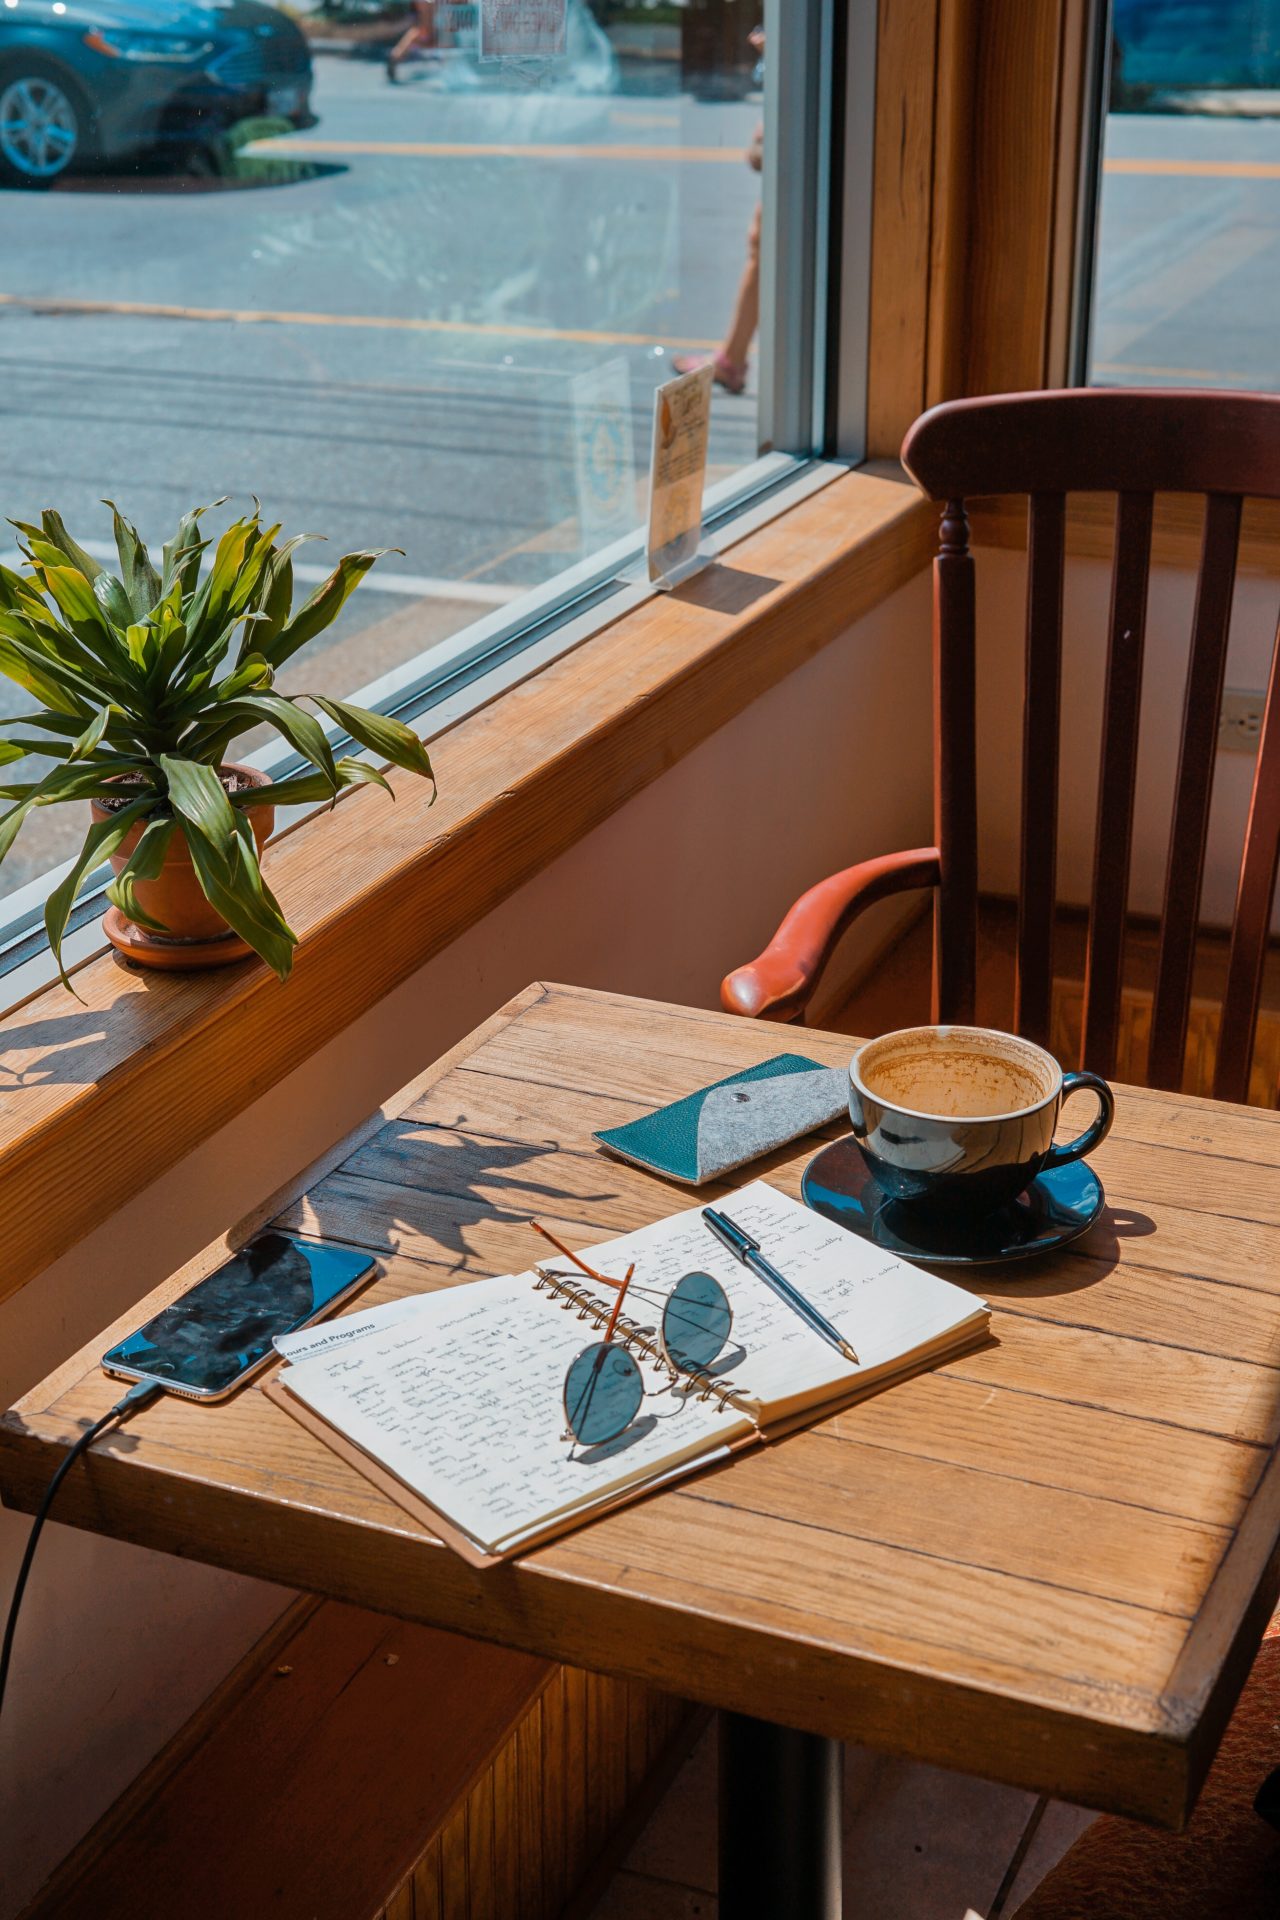 Image of a cozy cafe table by a window.